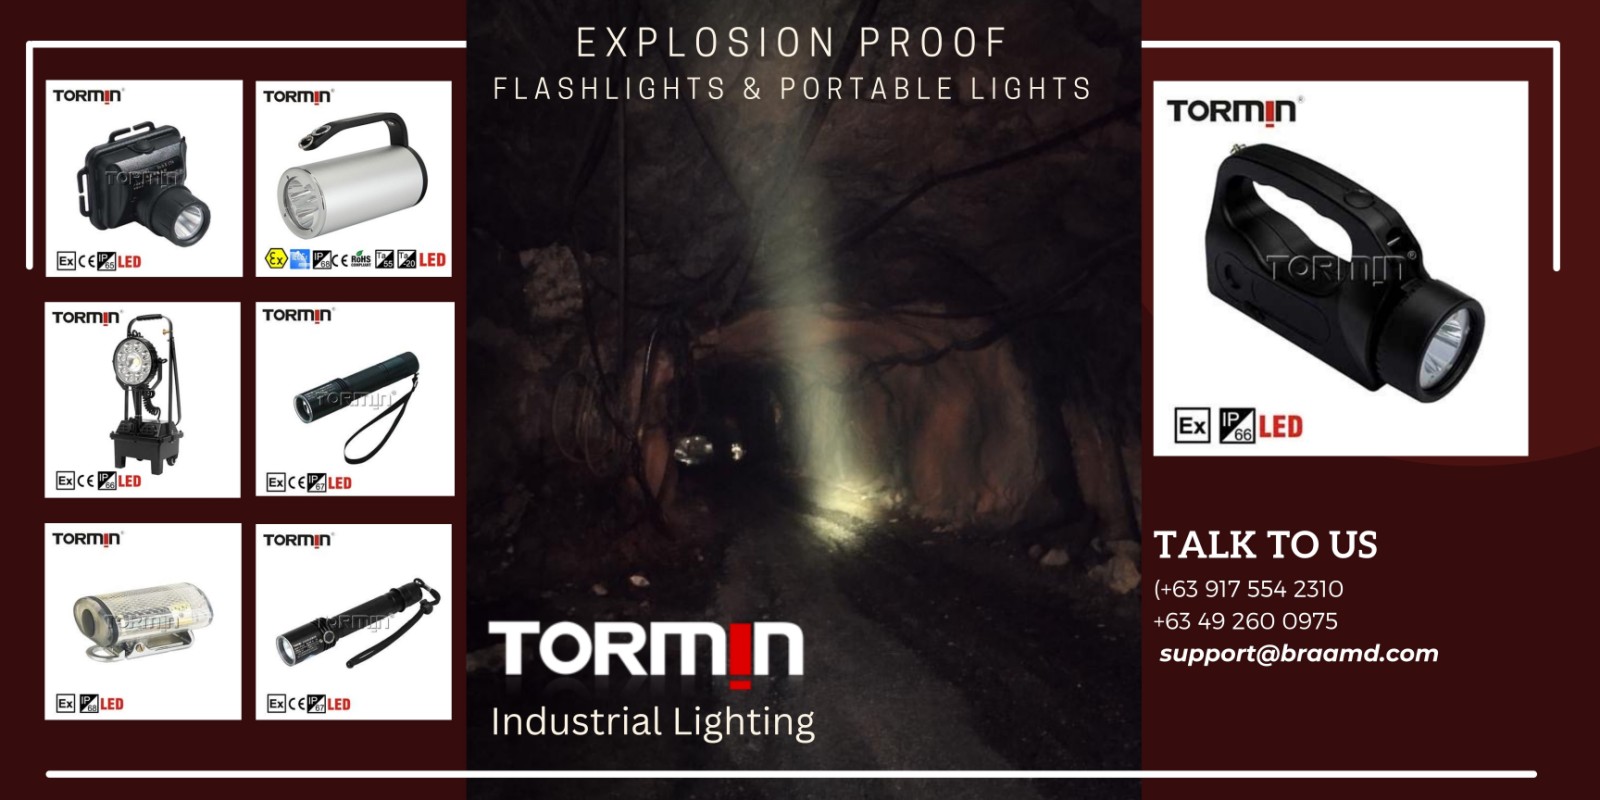 Tormin Explosion Proof Flashlights and Portable Lights